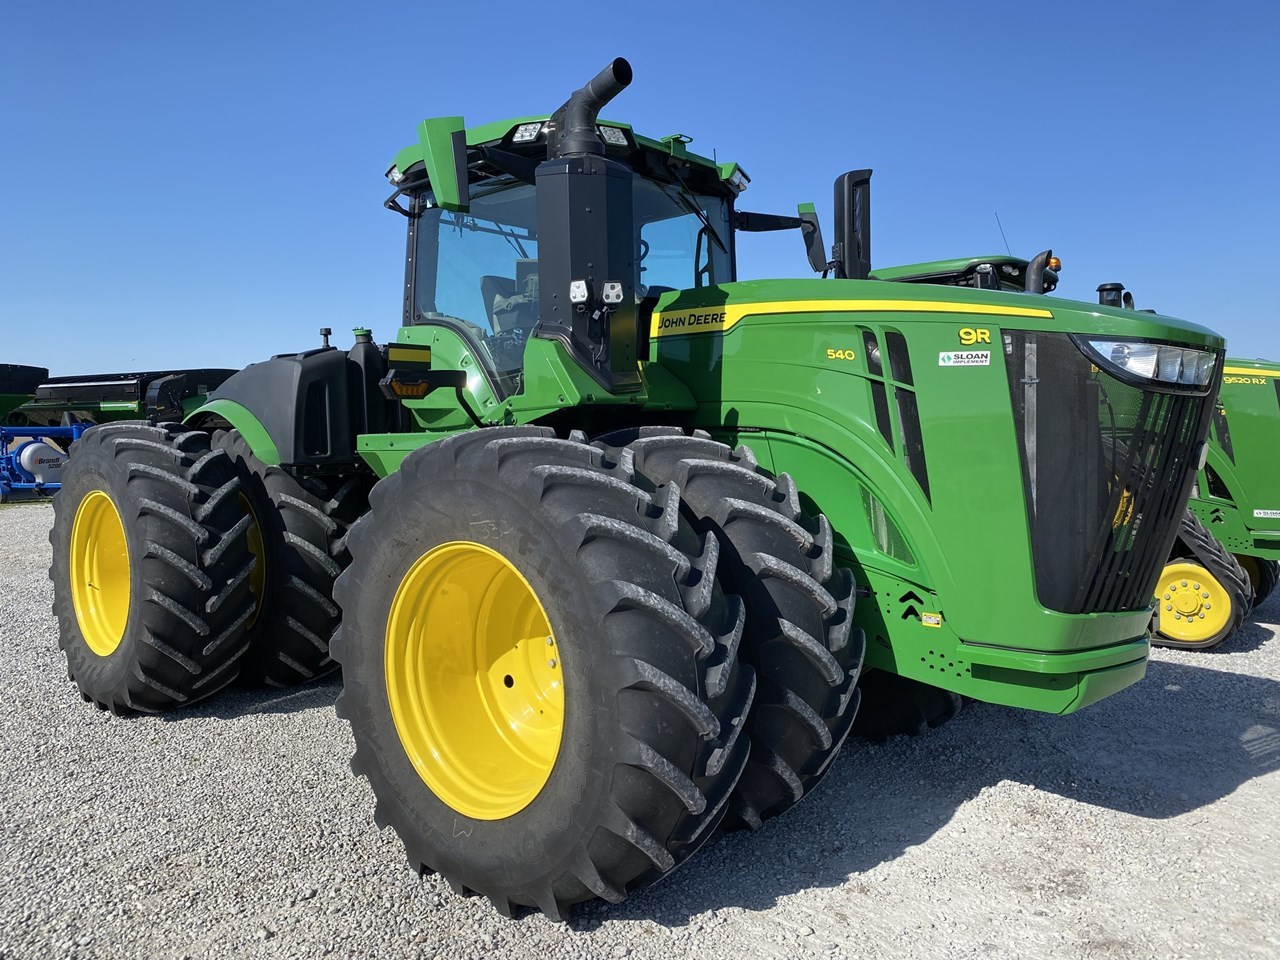 2022 John Deere 9r 540 Tractor 4wd For Sale In Atwood Illinois 9554